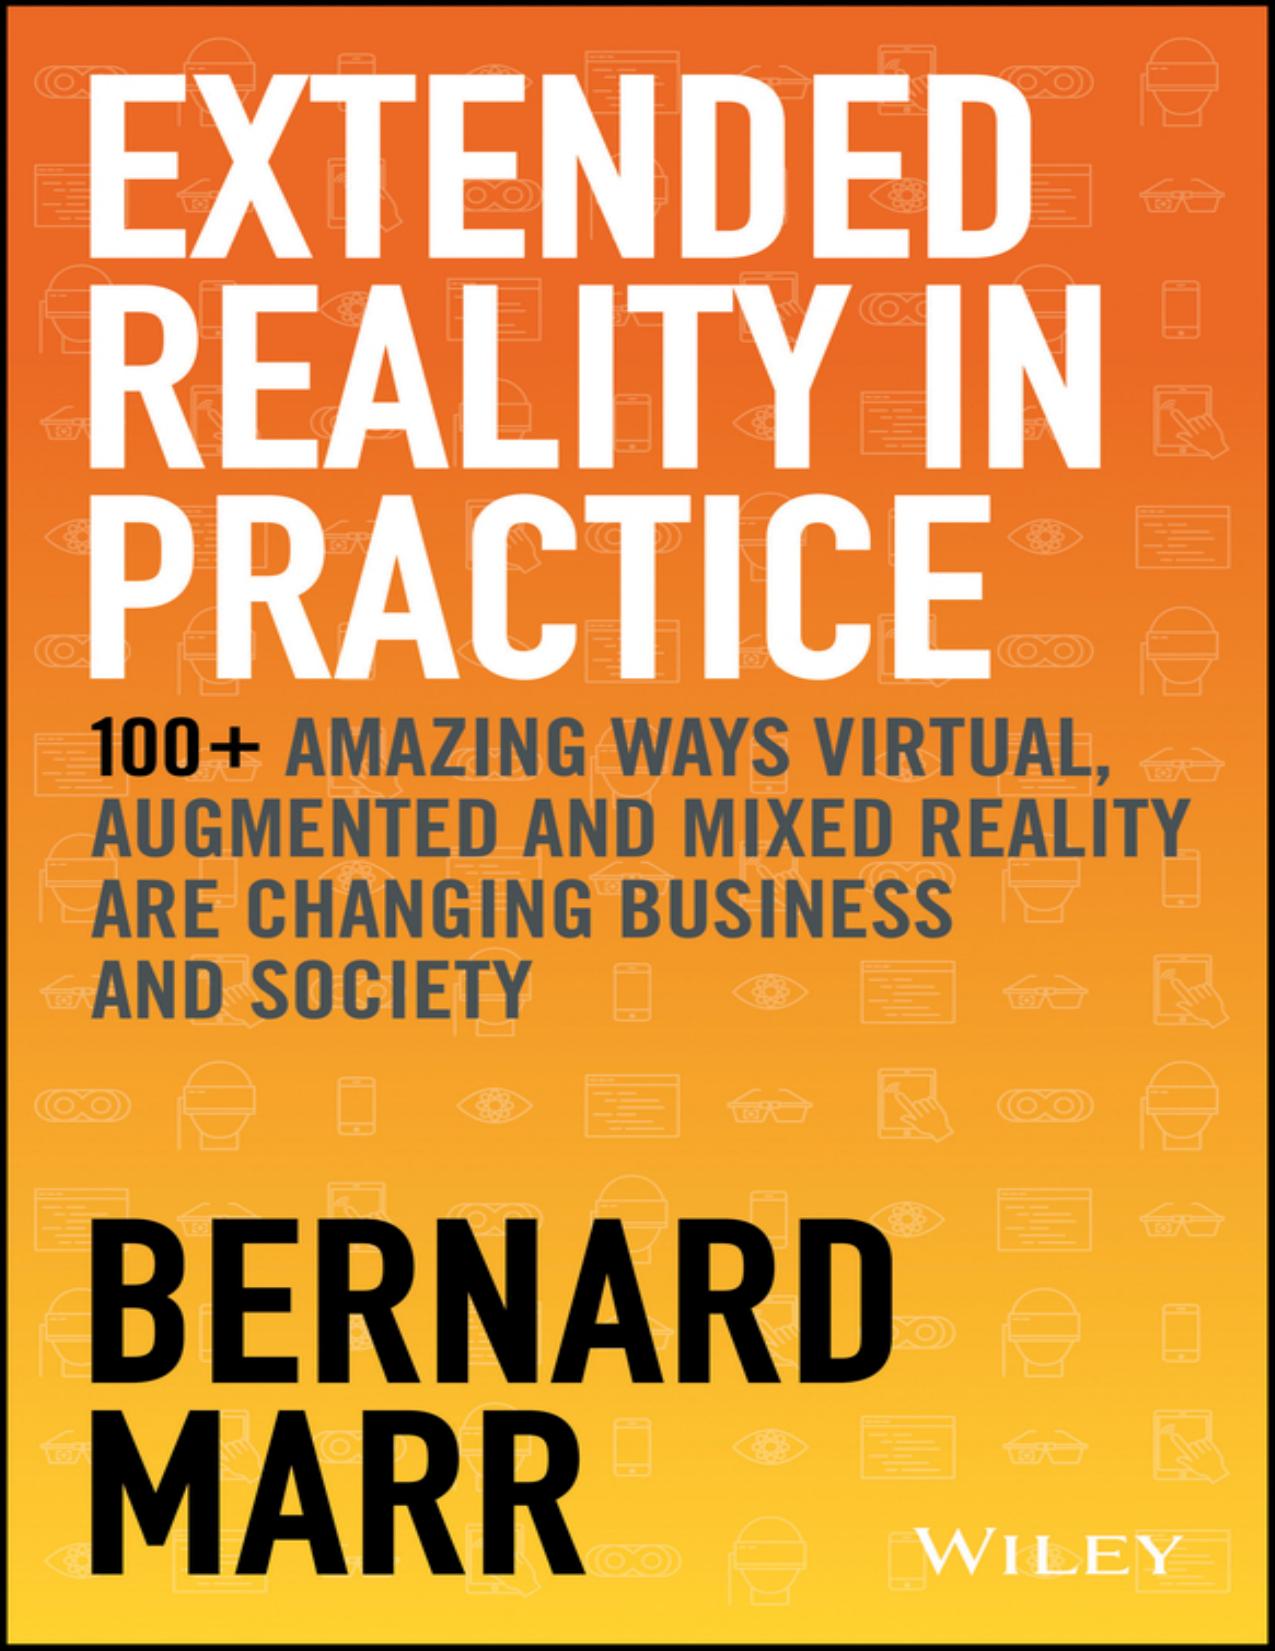 Extended Reality in Practice by Bernard Marr